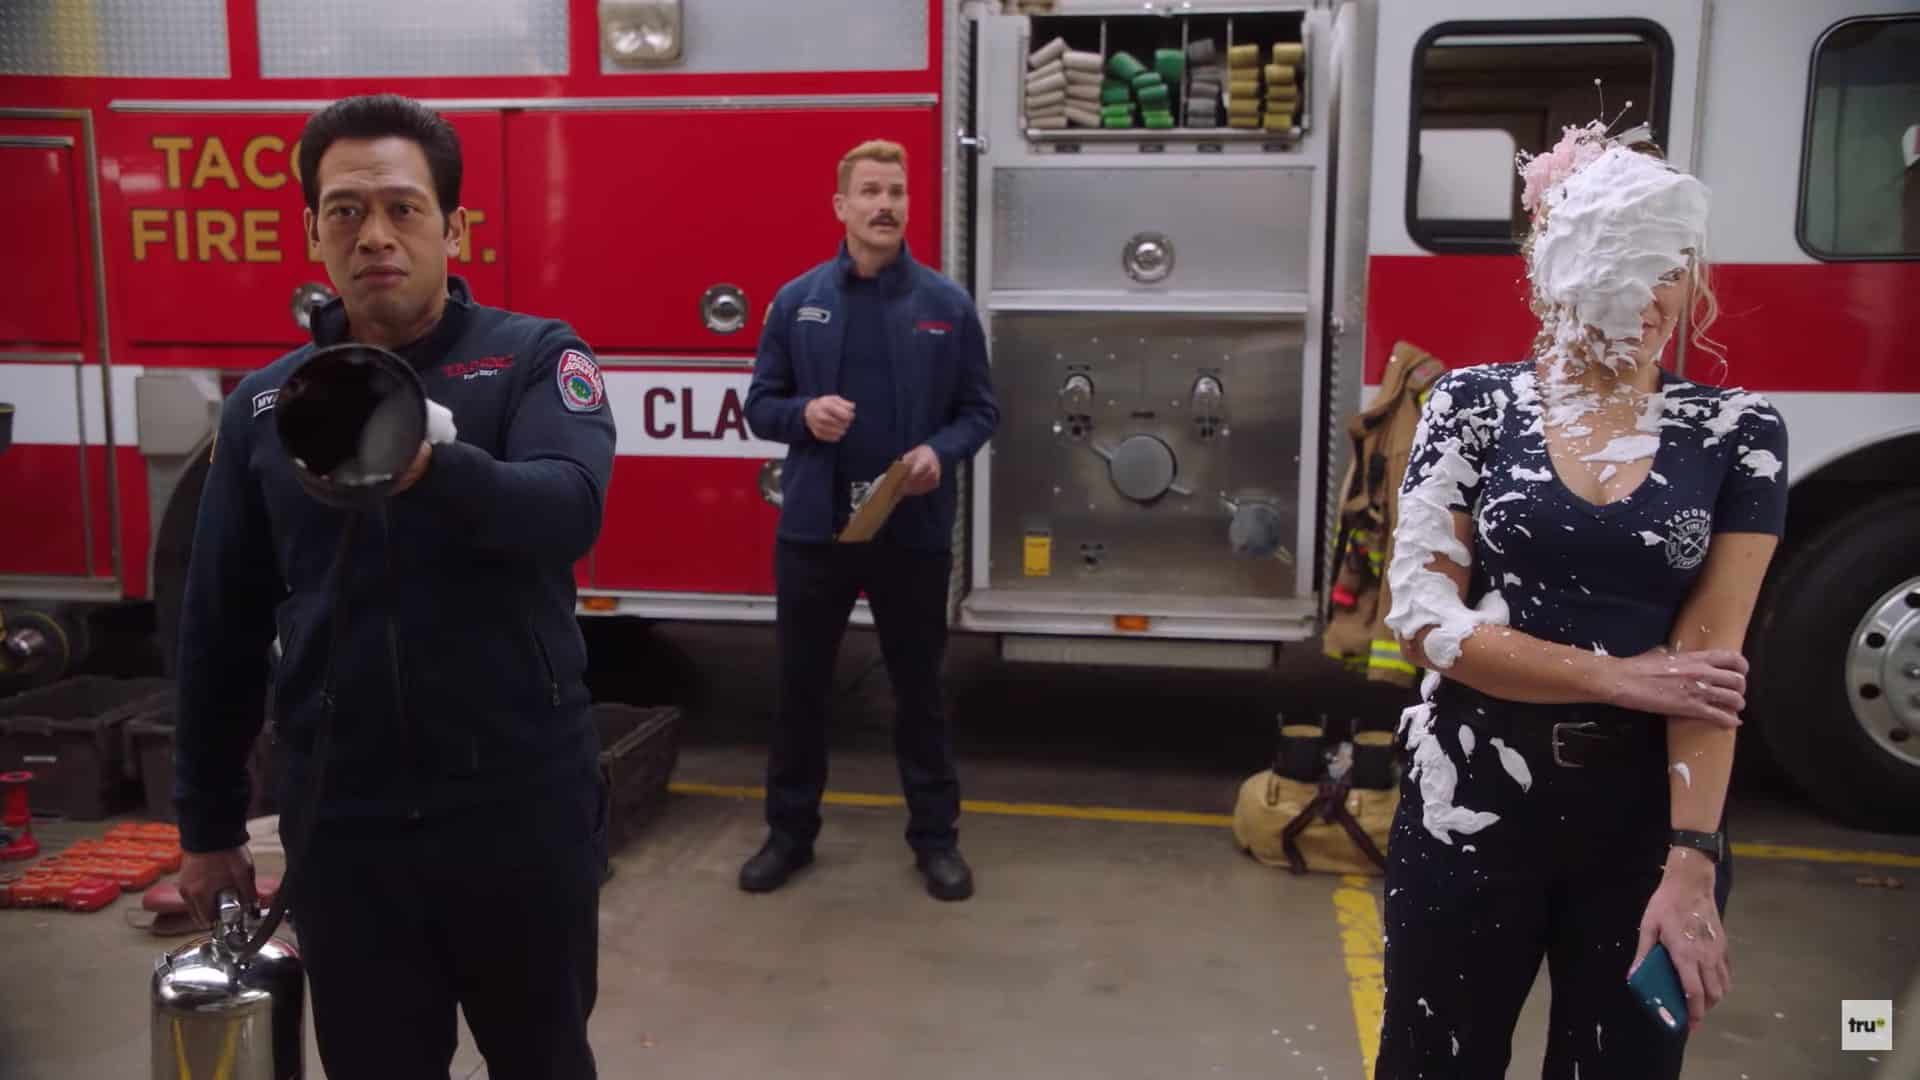 A still from the previous season of the show, Tacoma FD (Credits: truTV)